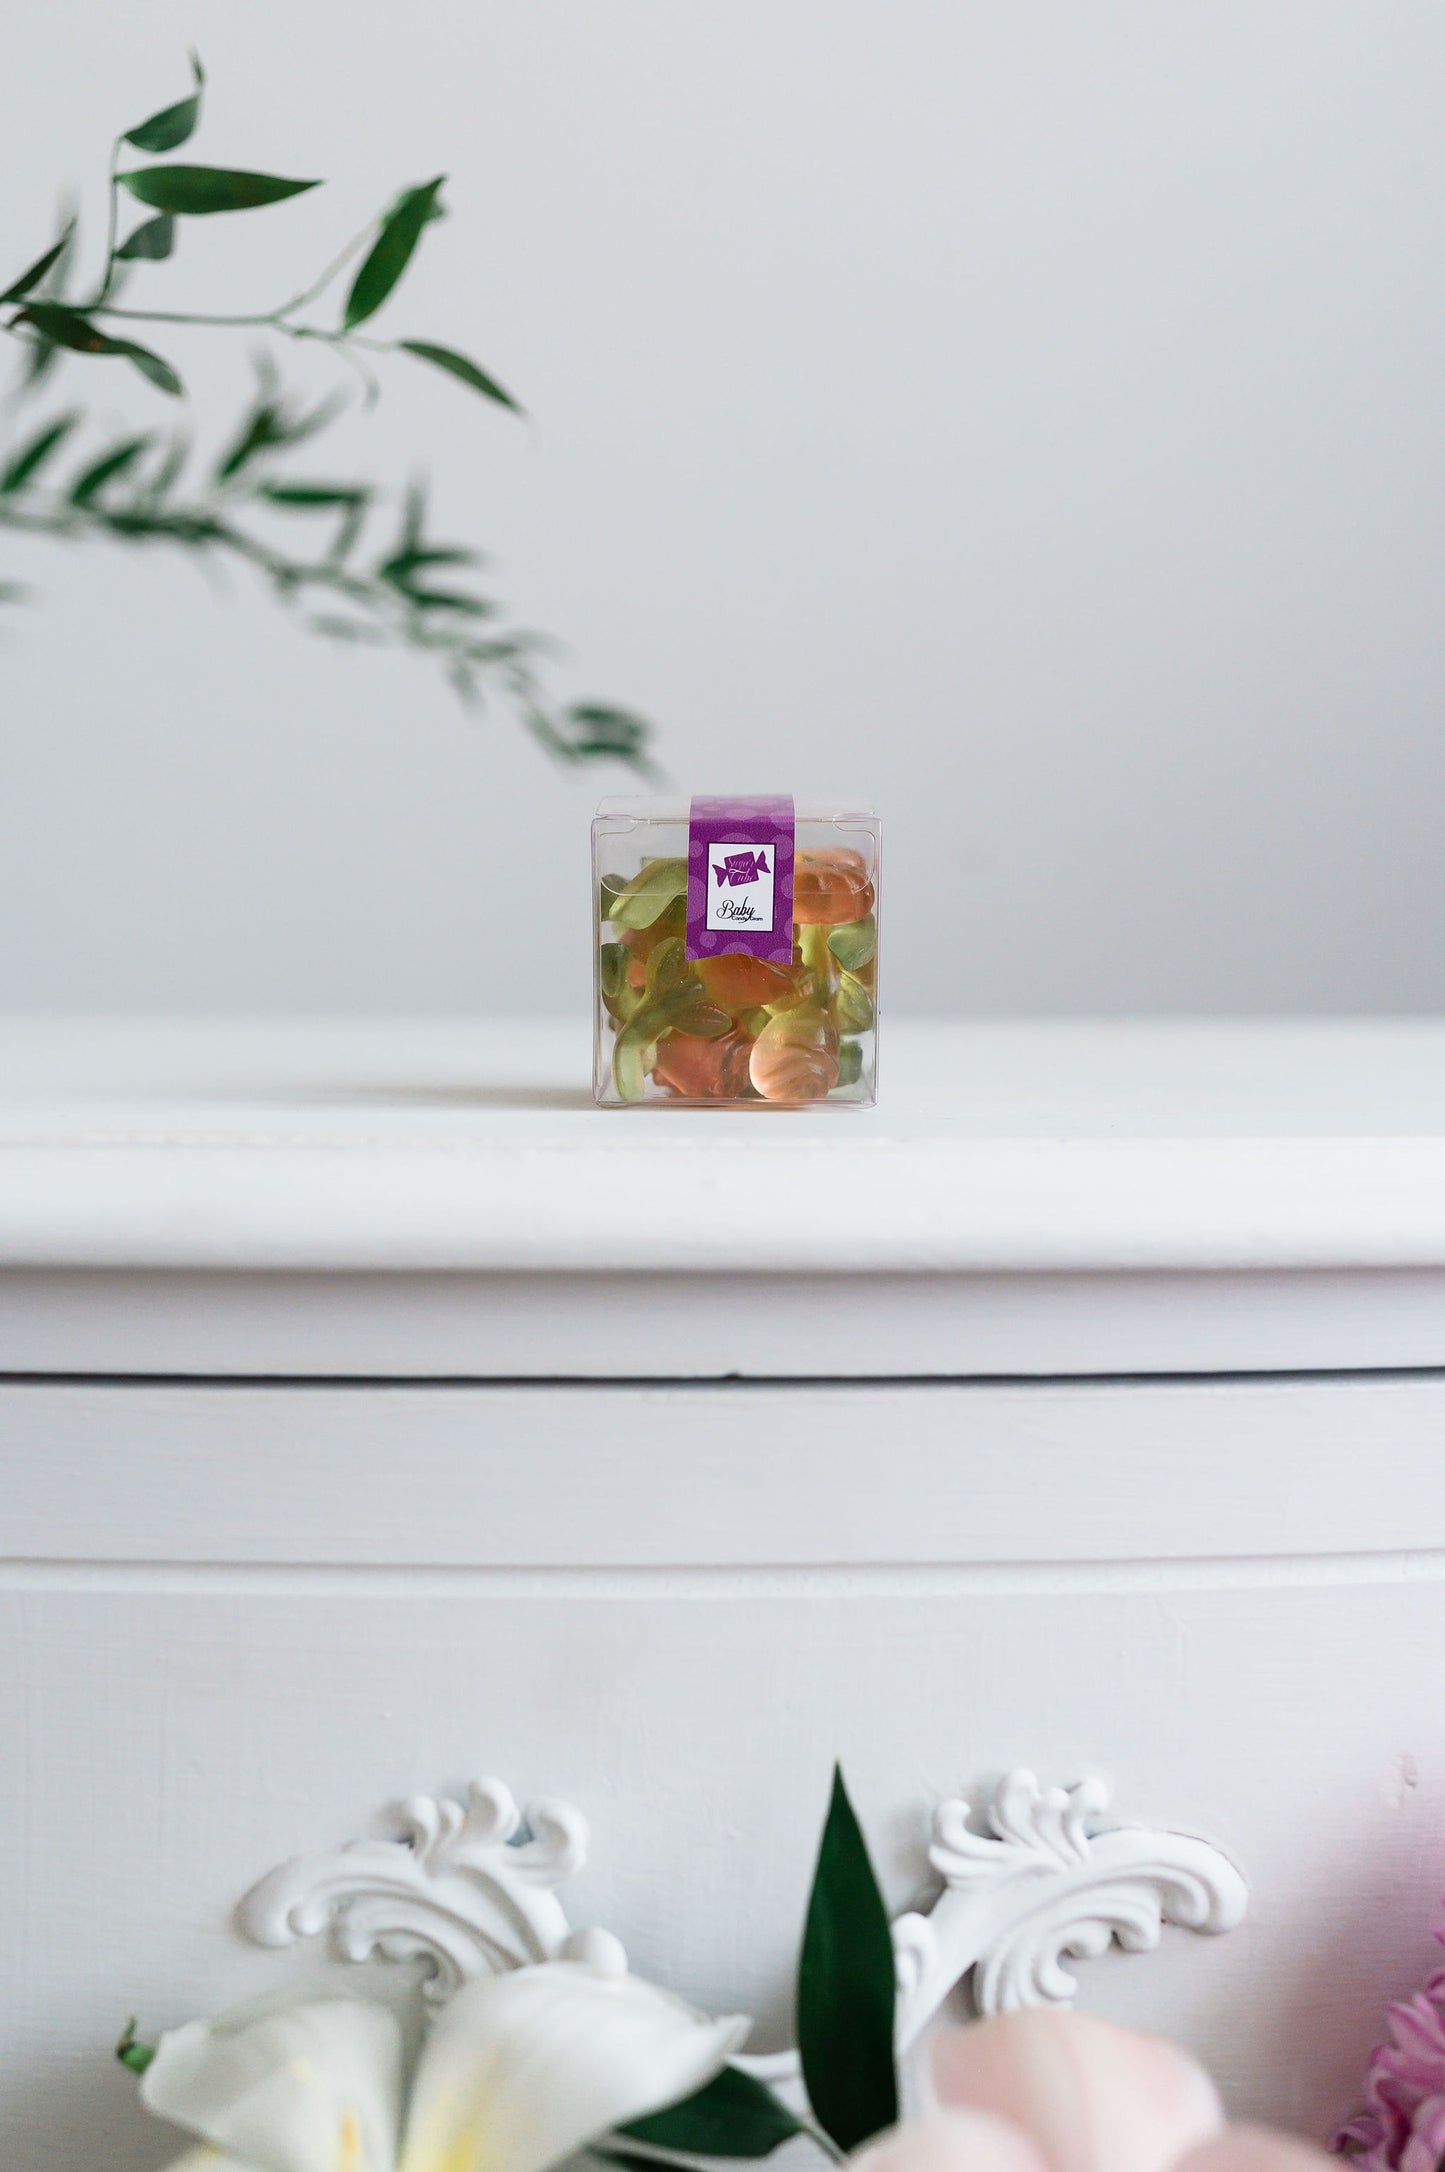 Cocktail Cube Baby CandyGram